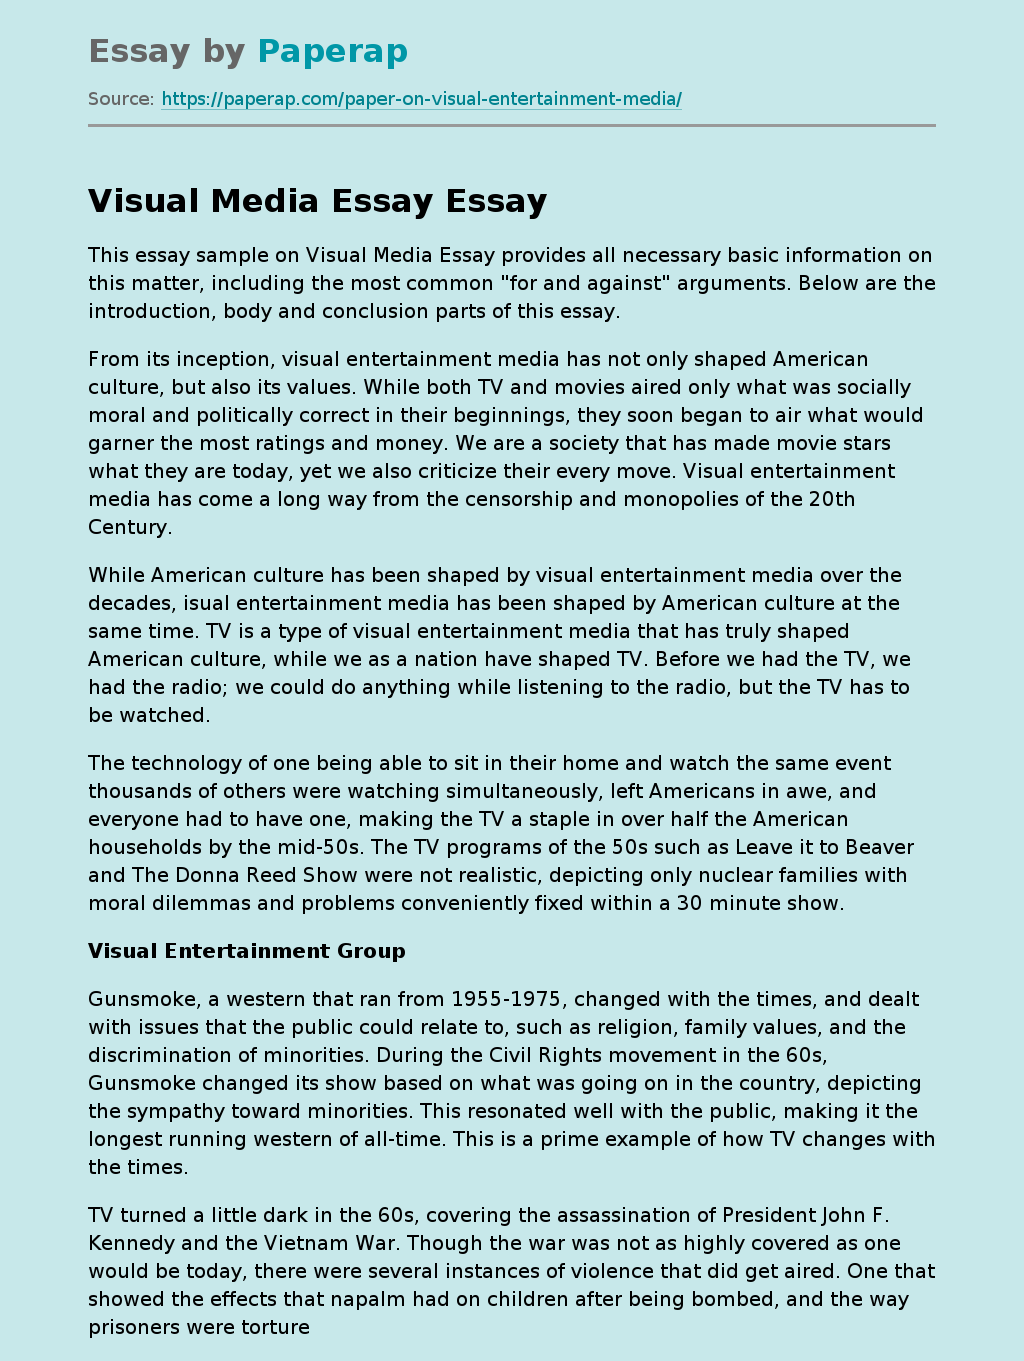 Visual Entertainment Group in America